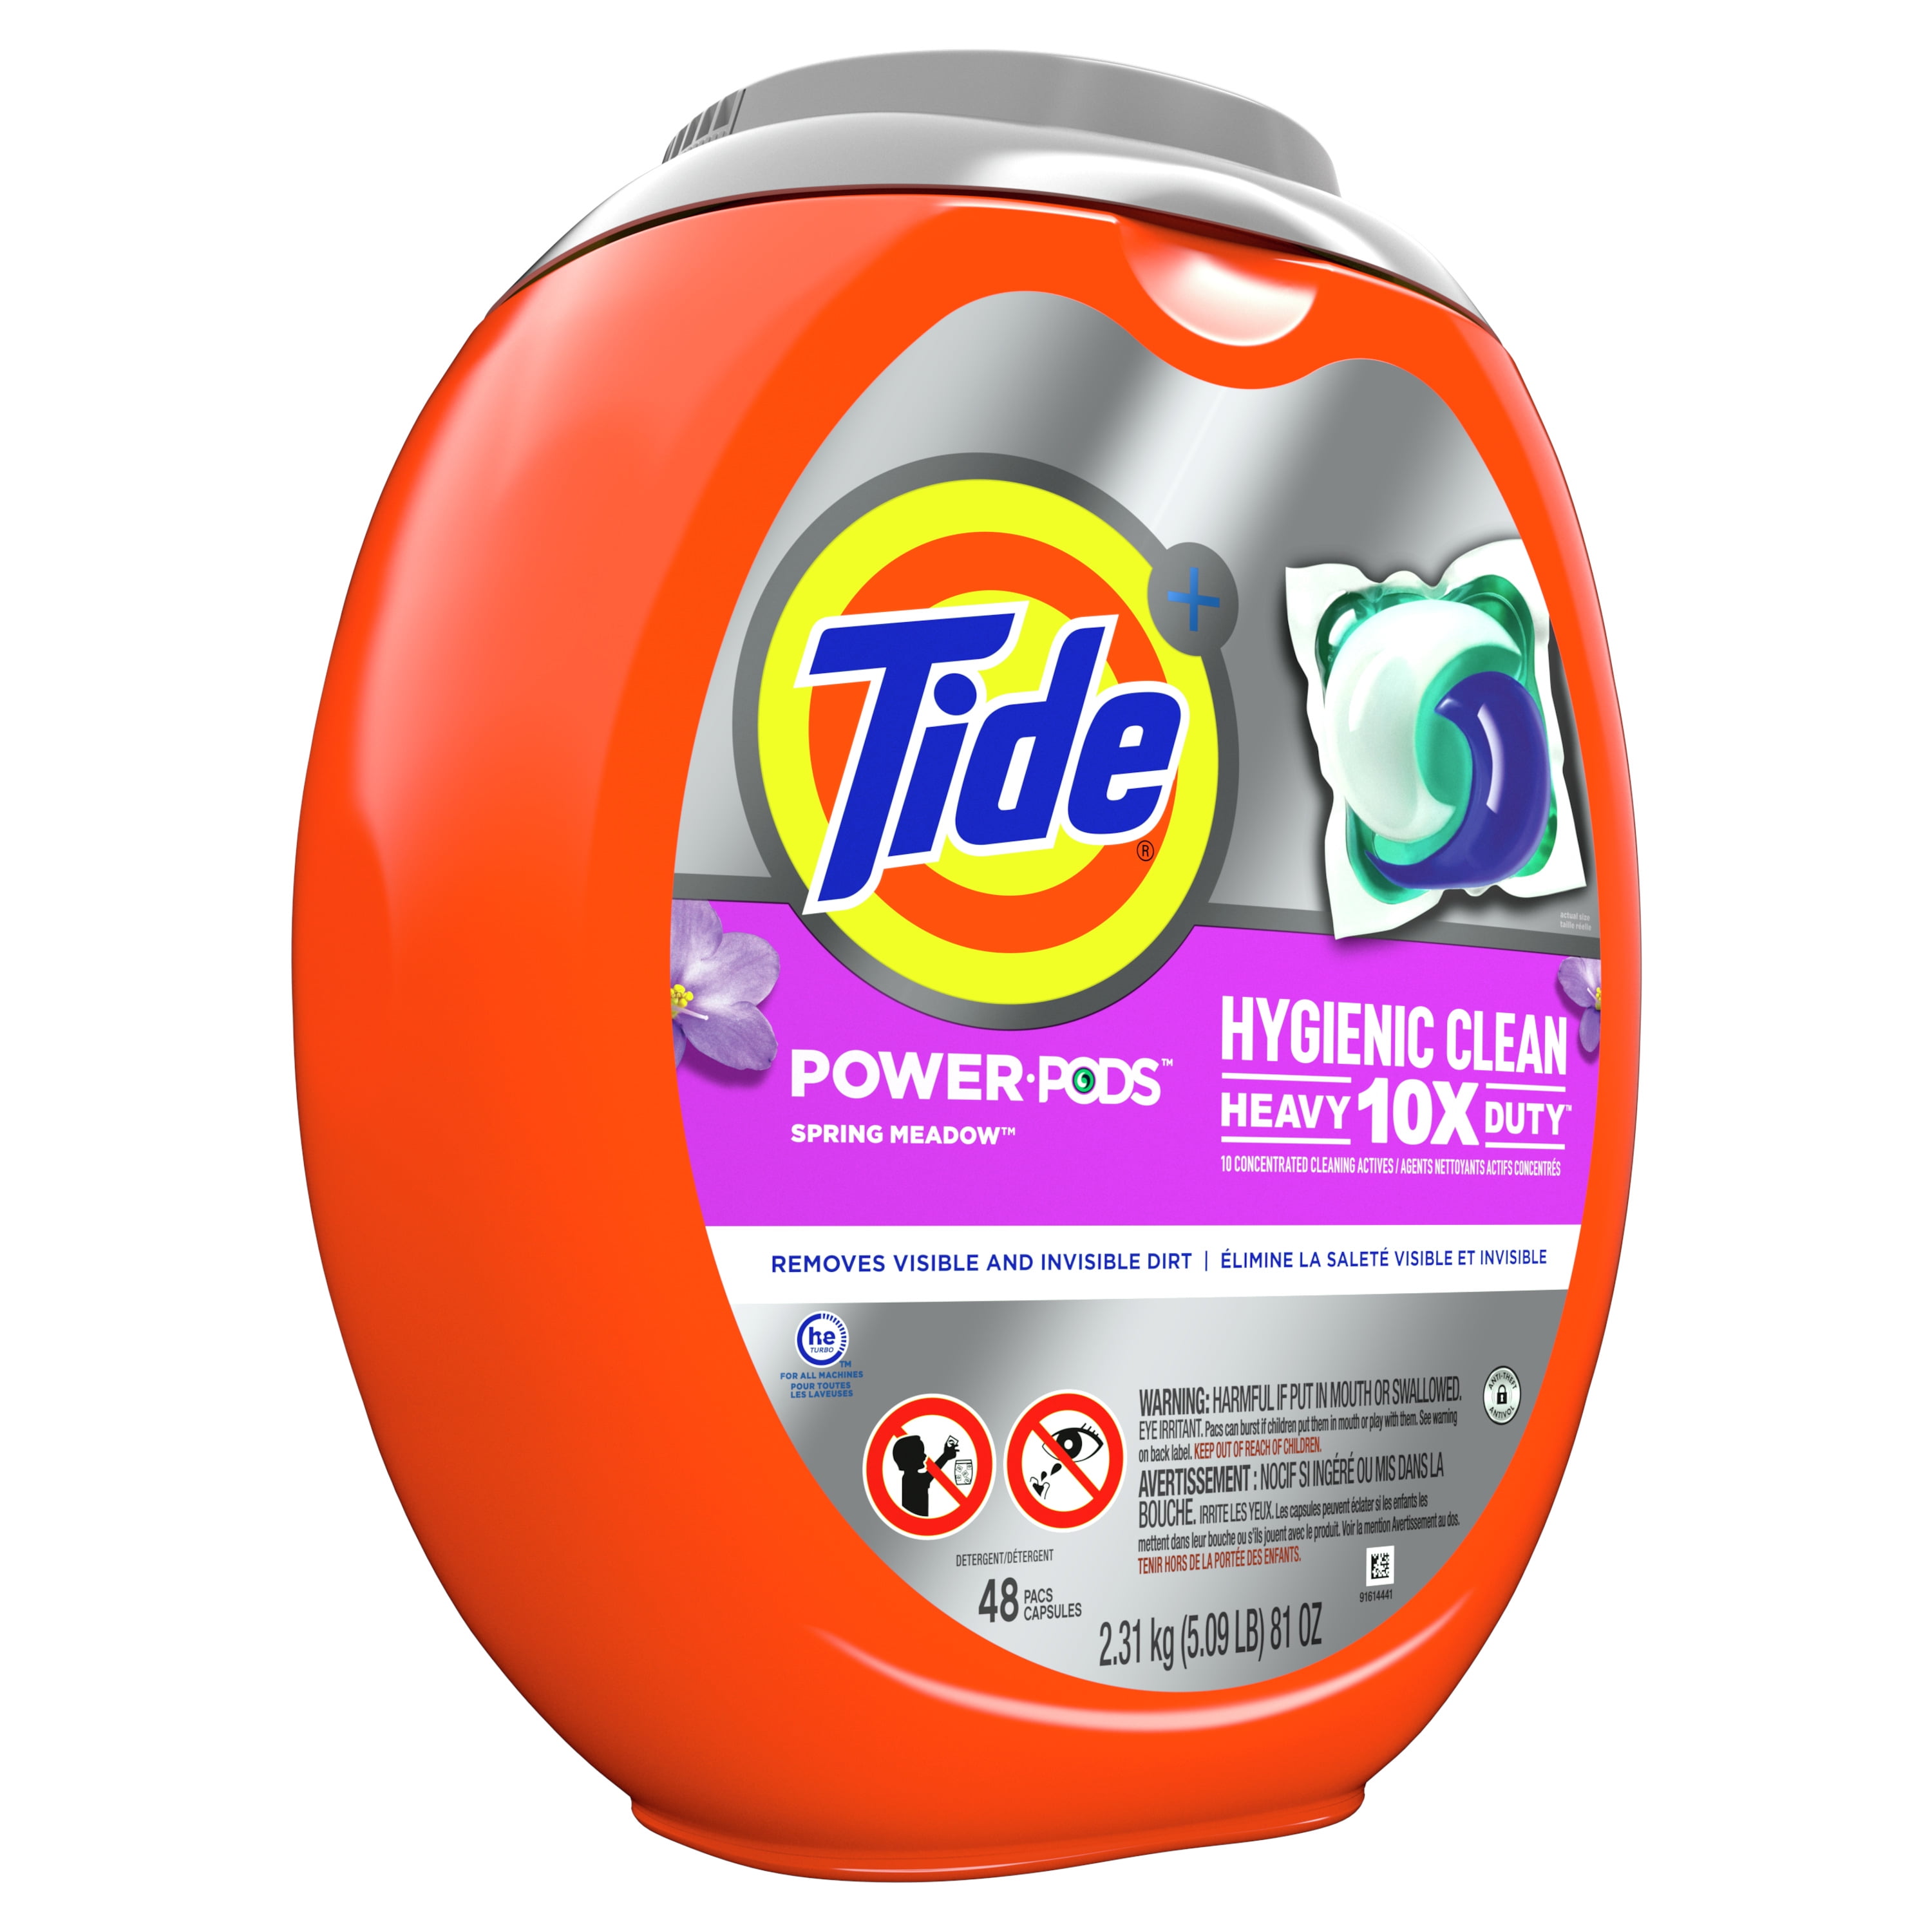 Tide Hygienic Clean Power Pods Spring Meadow, 48 Ct Laundry Detergent Pacs - 2